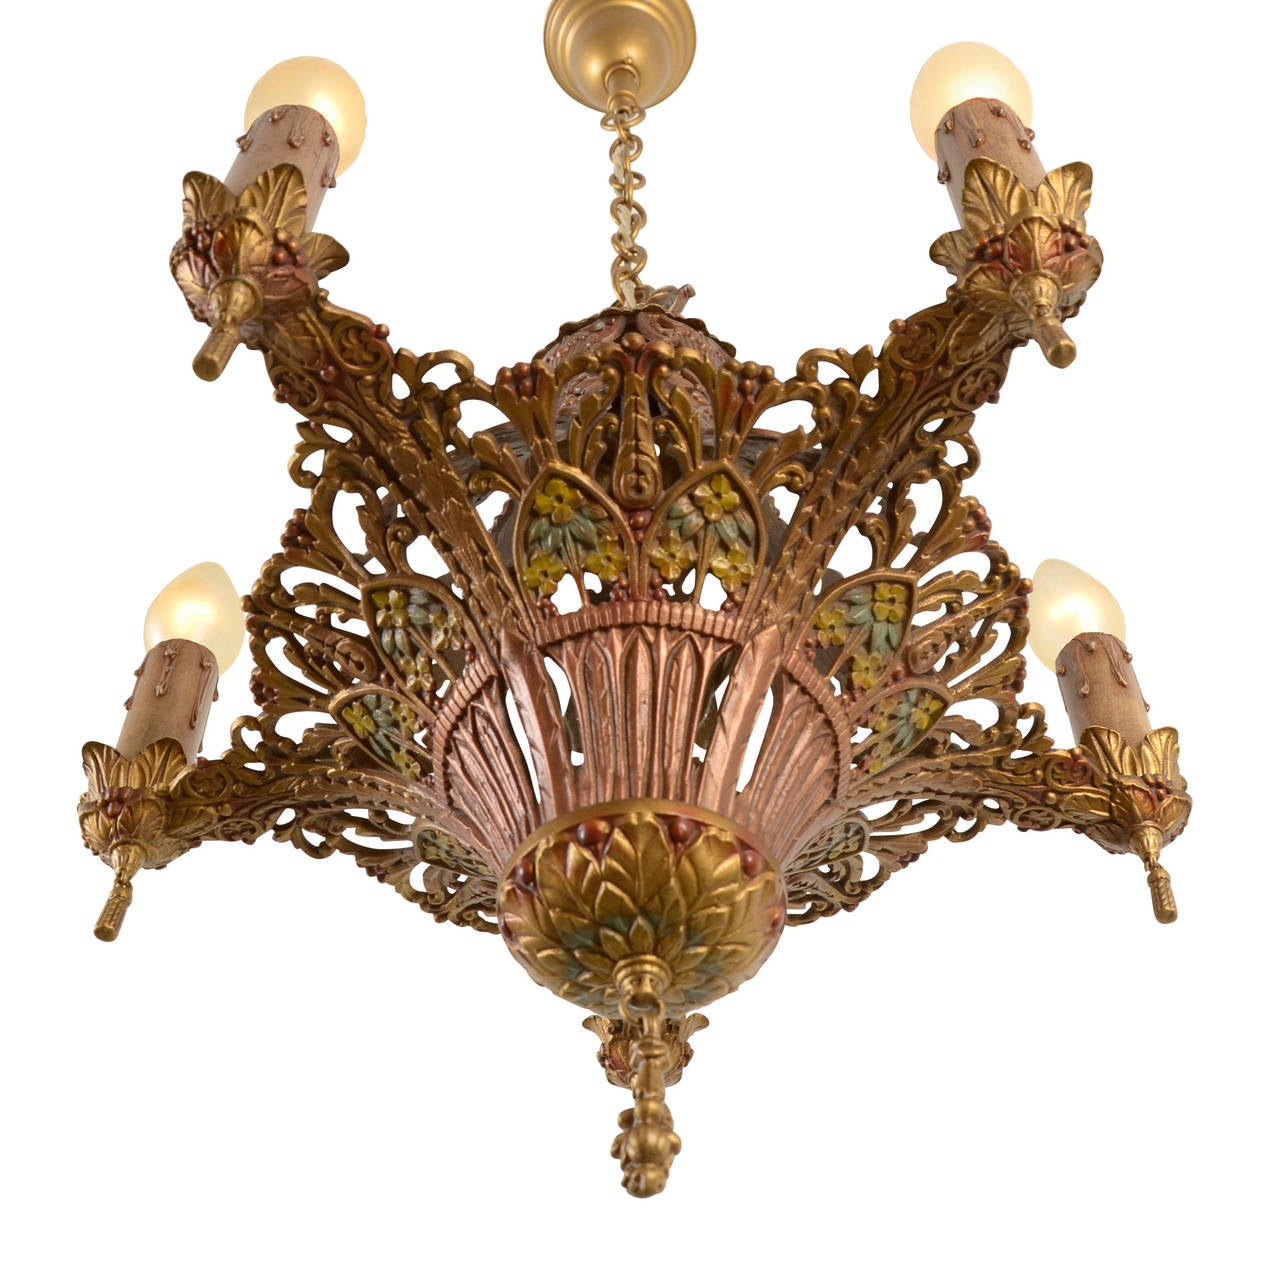 Revival Over-The-Top Floral Chandelier with Original Polychrome, circa 1928